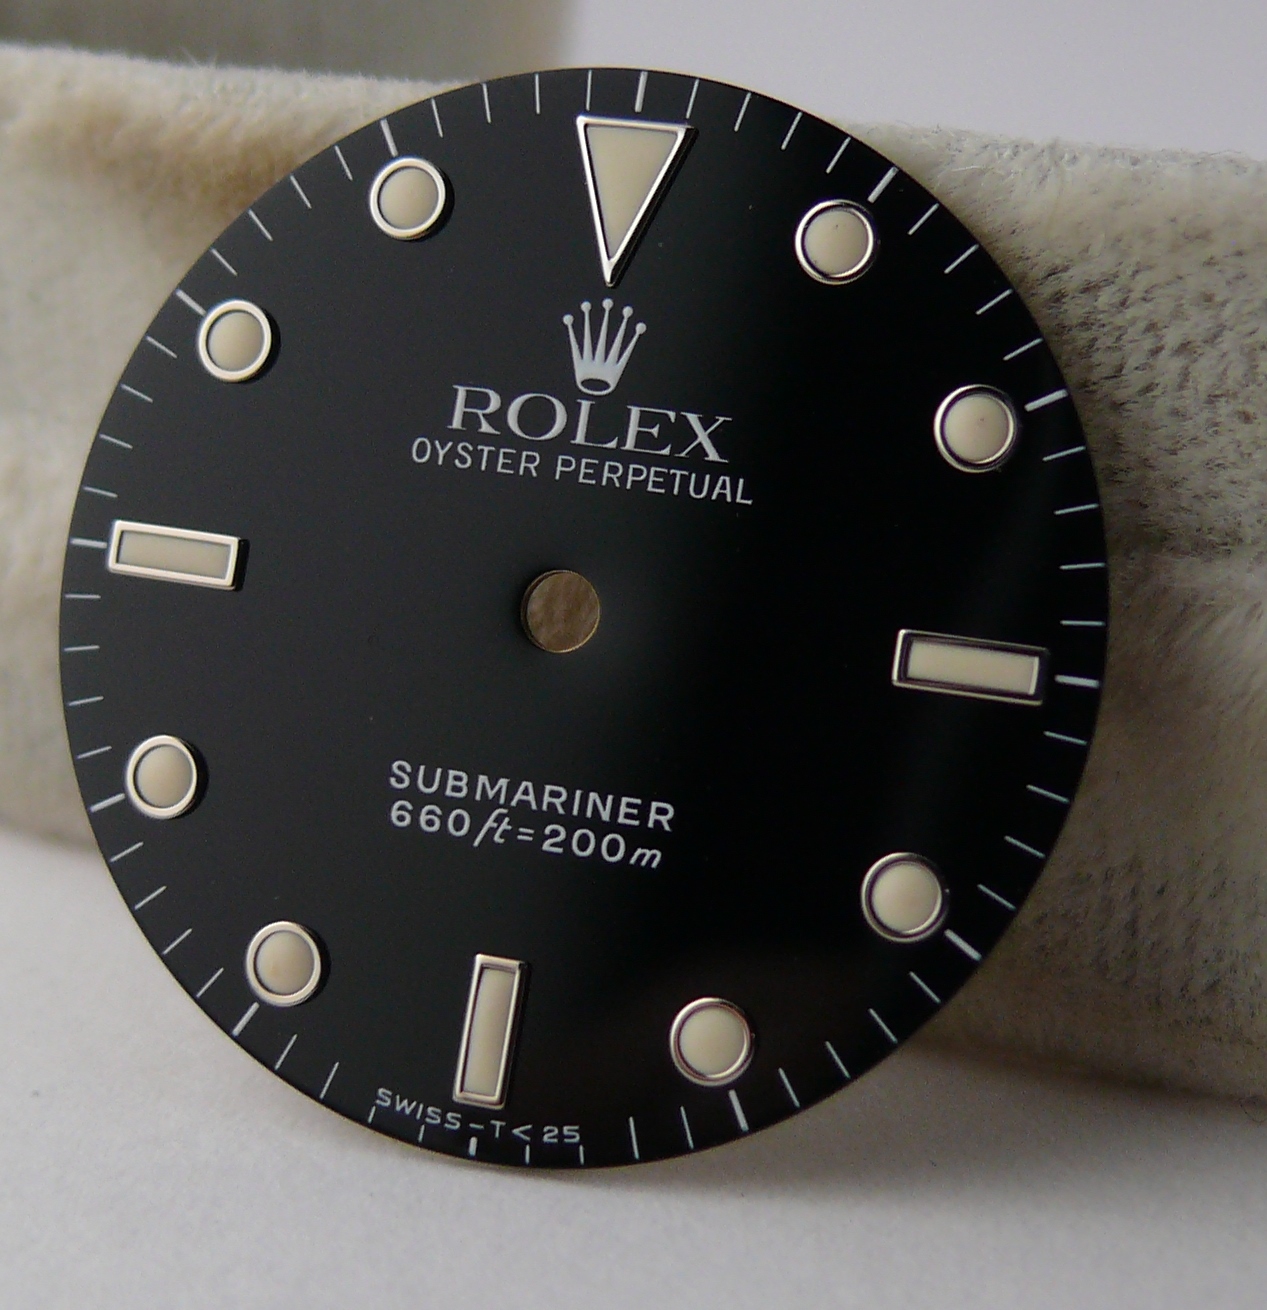 Vintage Gents Rolex Submariner Dial suitable for ref 5513. Please note dial is clean in condition. - Image 3 of 4